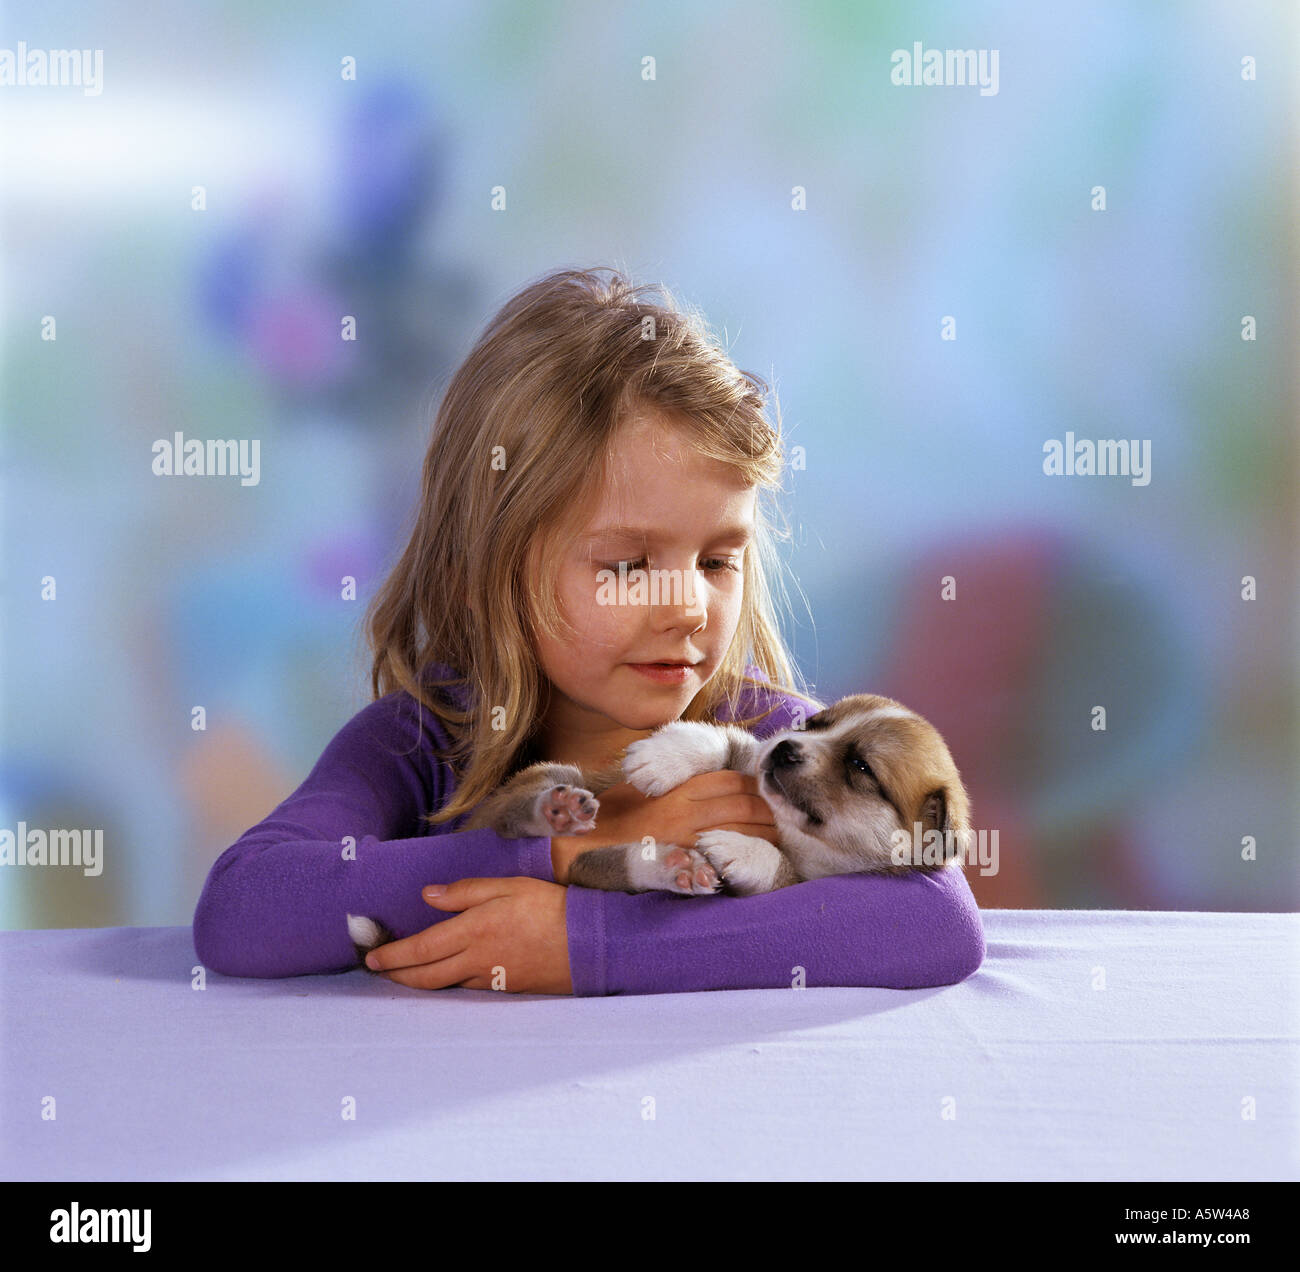 girl with half breed dog puppy  21 days  in arm Stock Photo